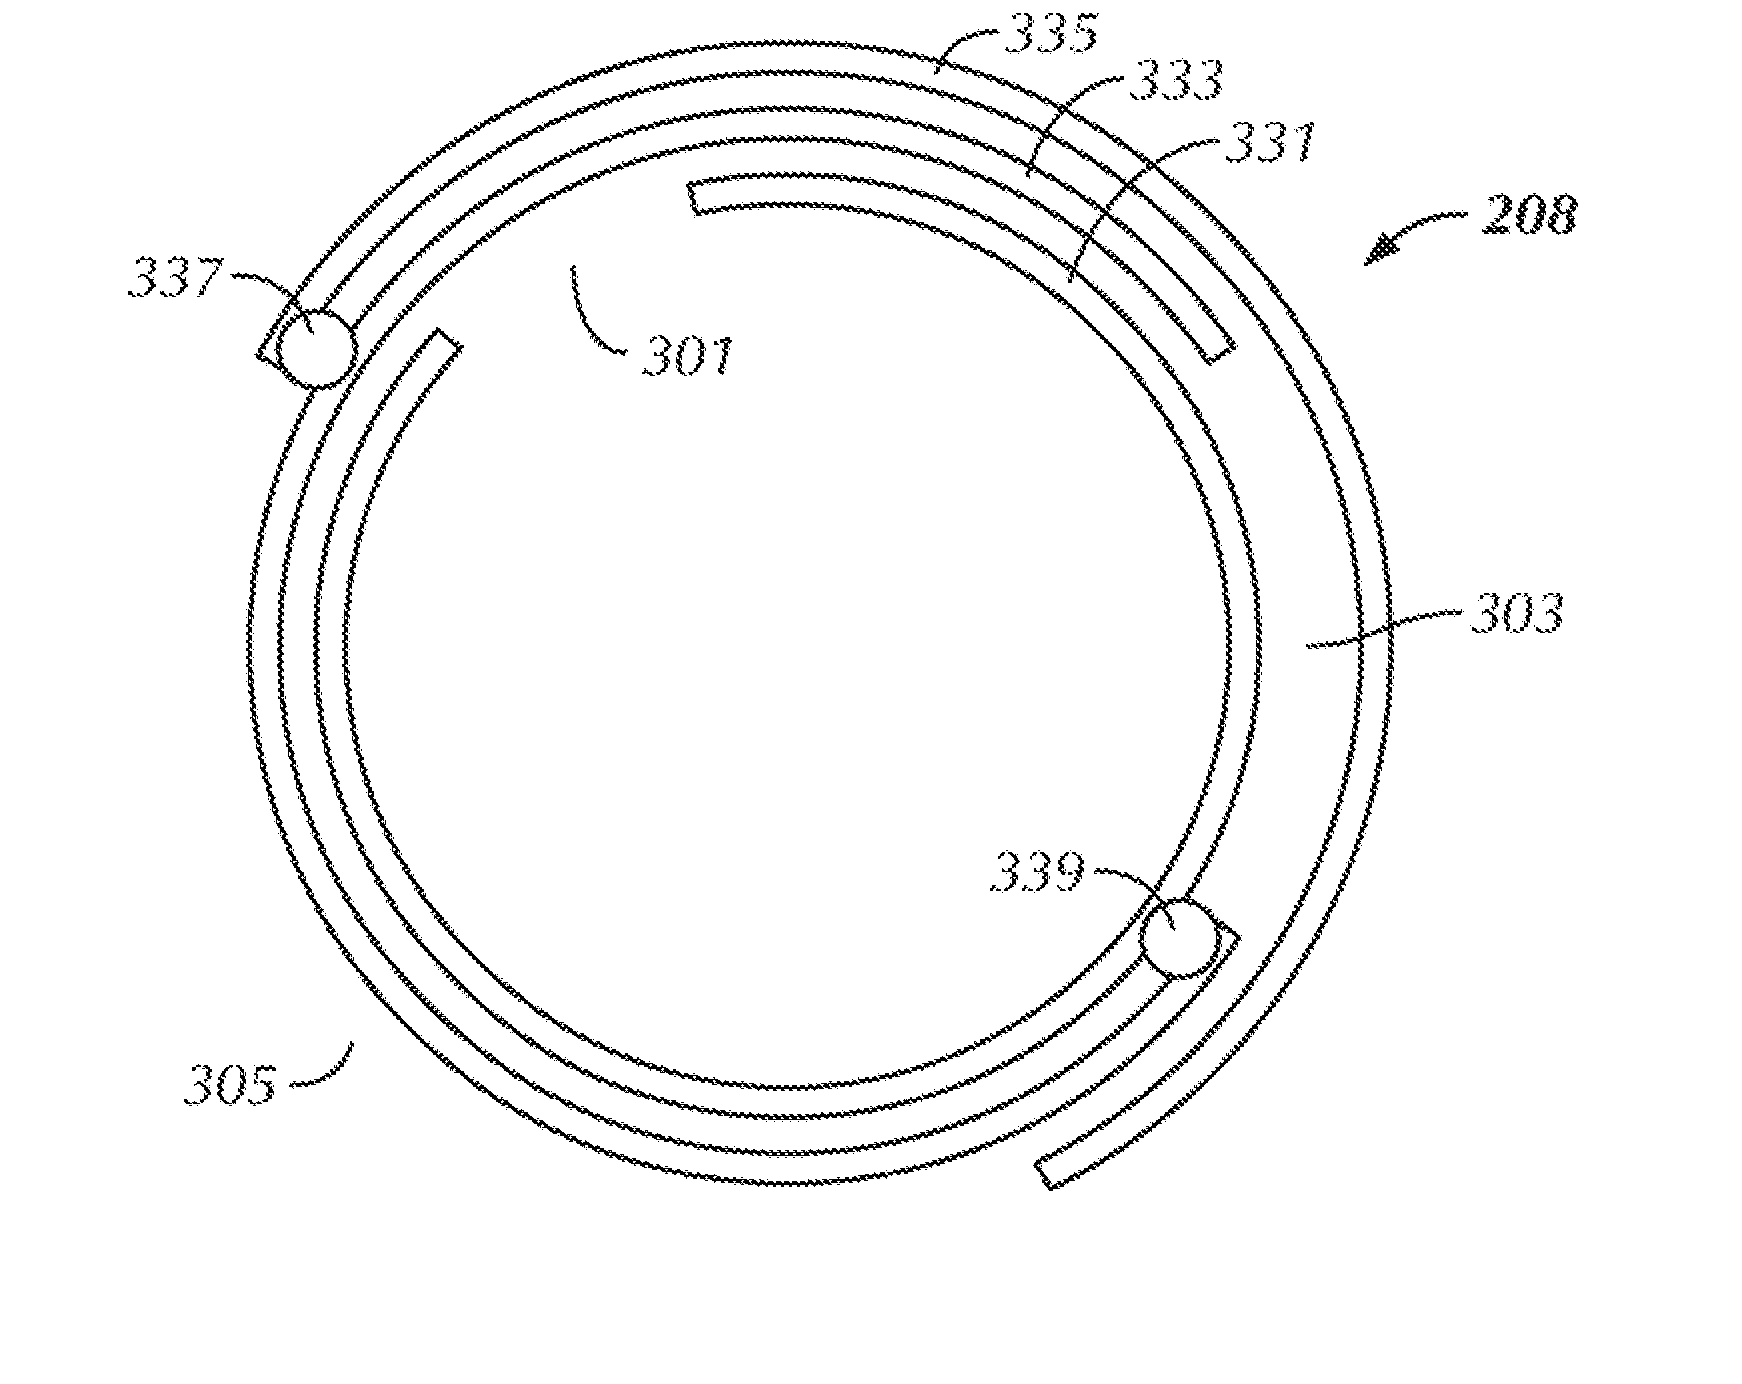 Expandable tubulars for use in geologic structures